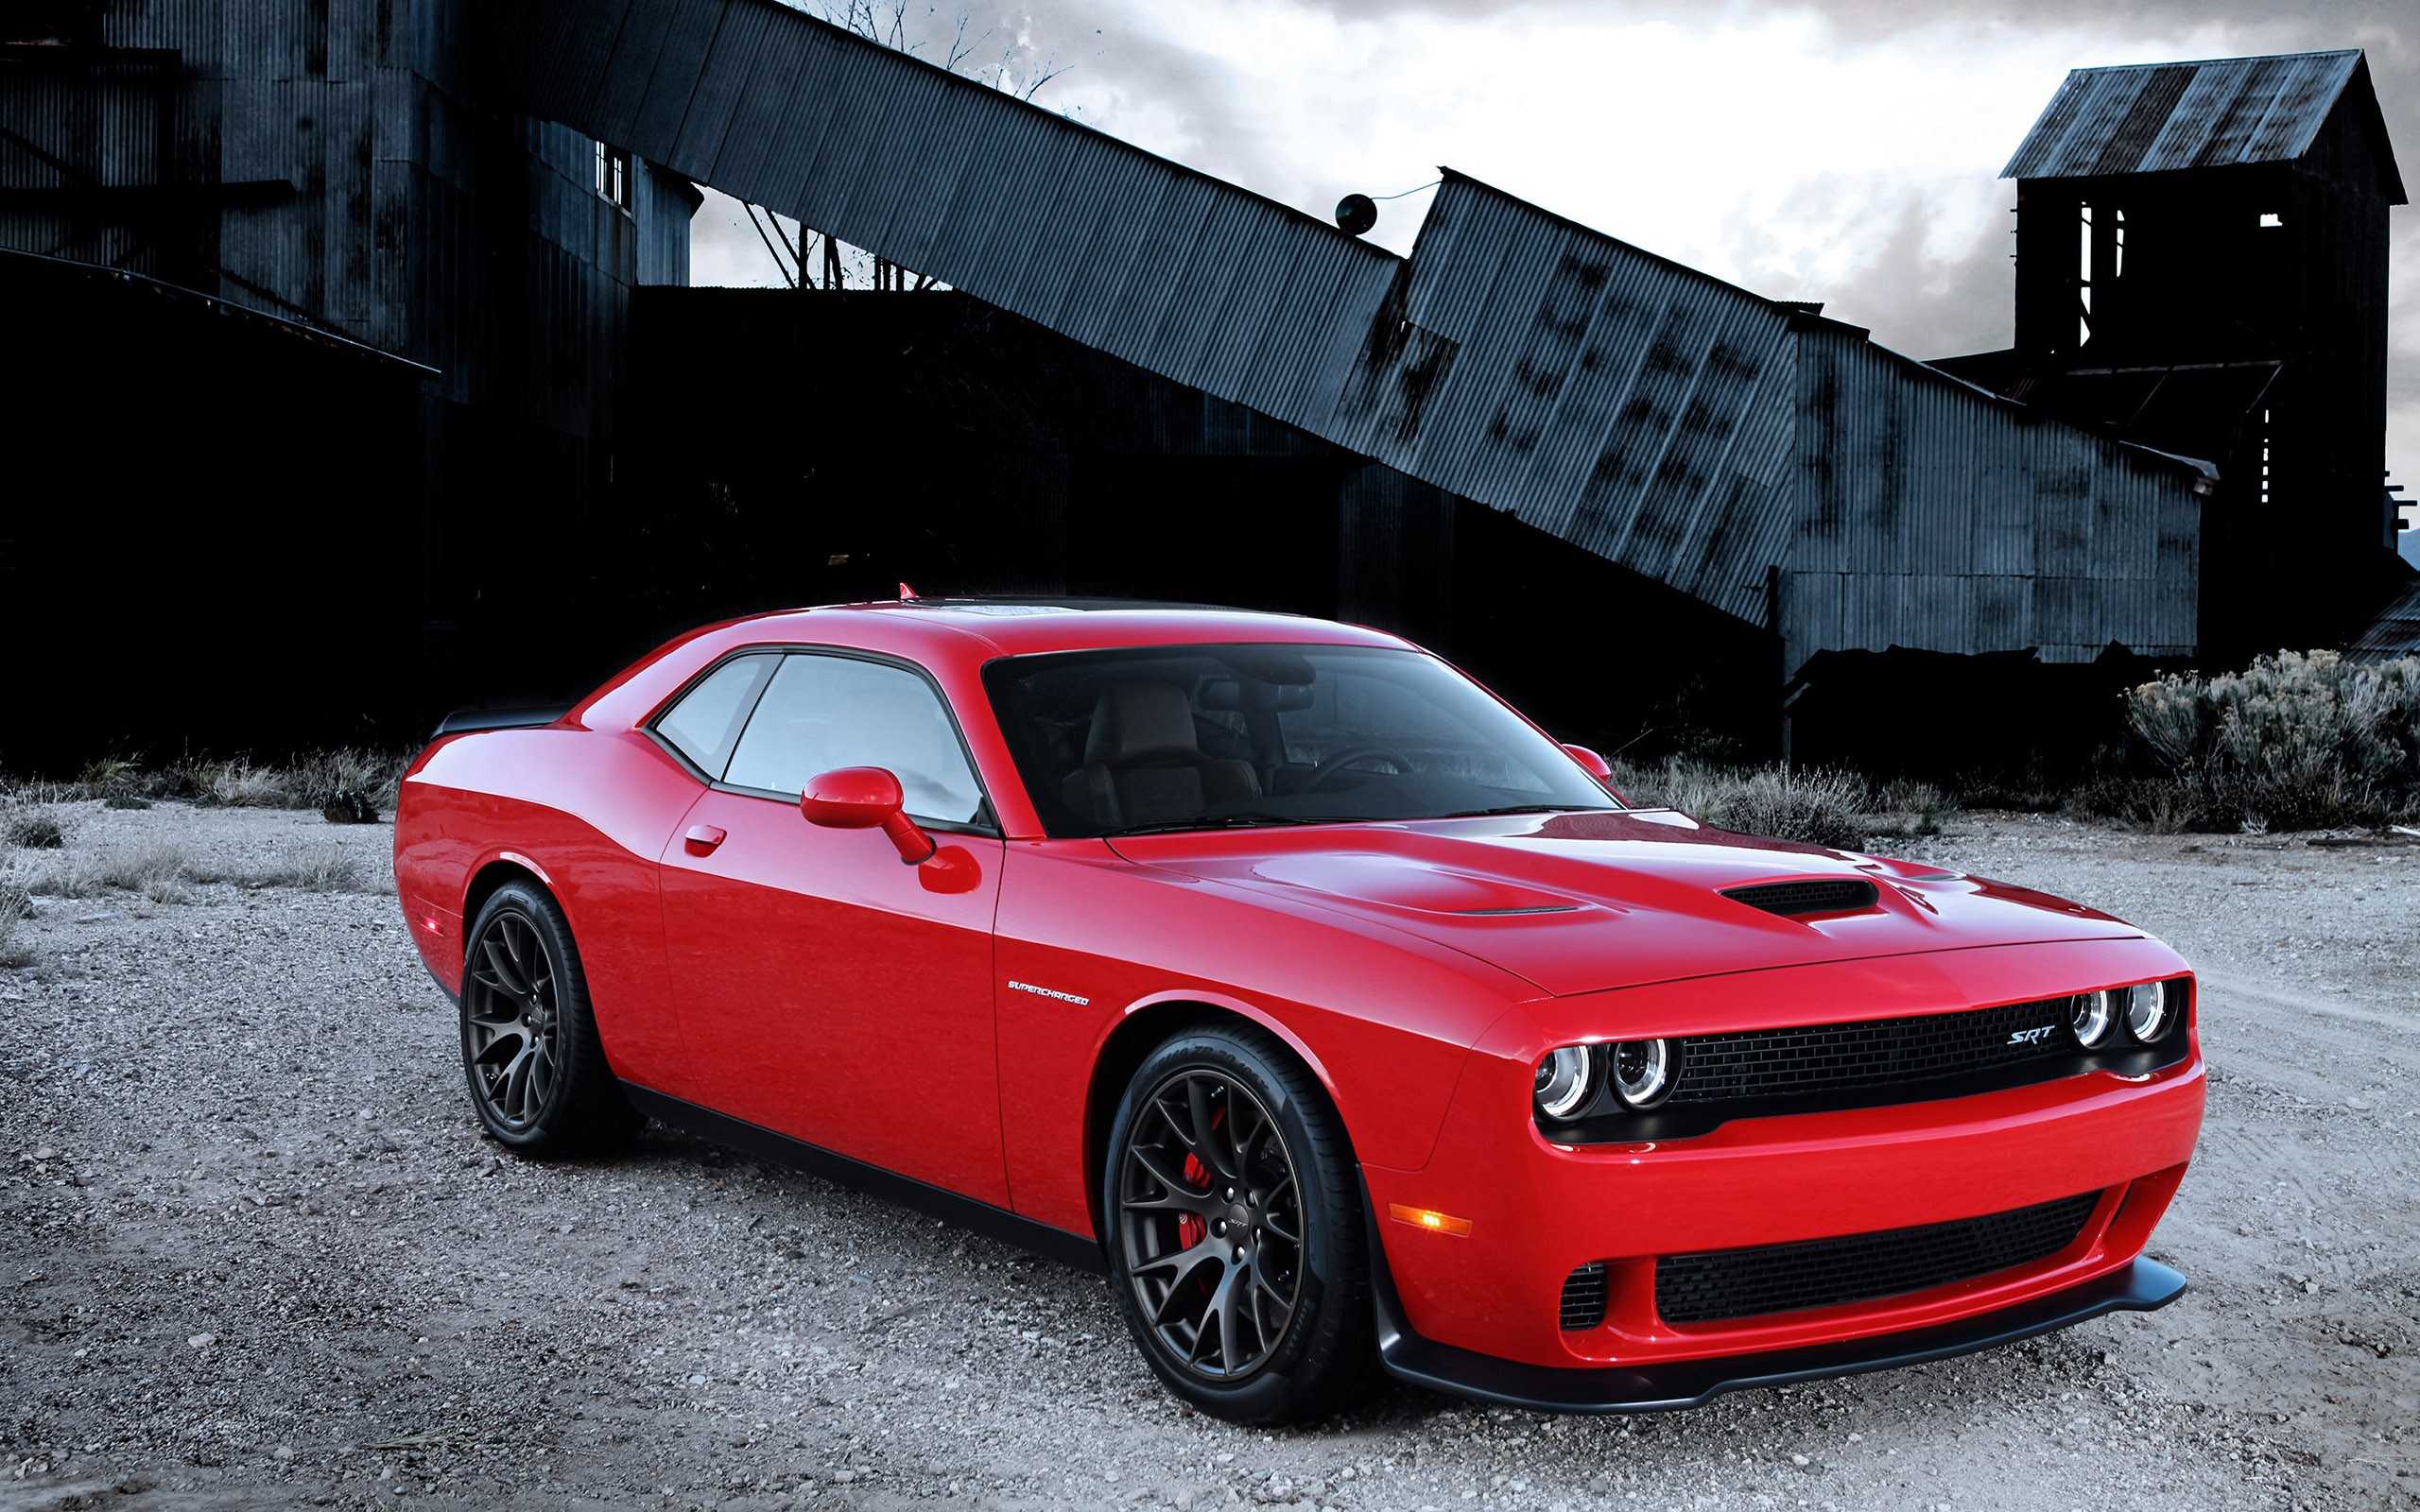 General 2560x1600 car red cars vehicle Dodge Challenger Dodge muscle cars American cars Stellantis